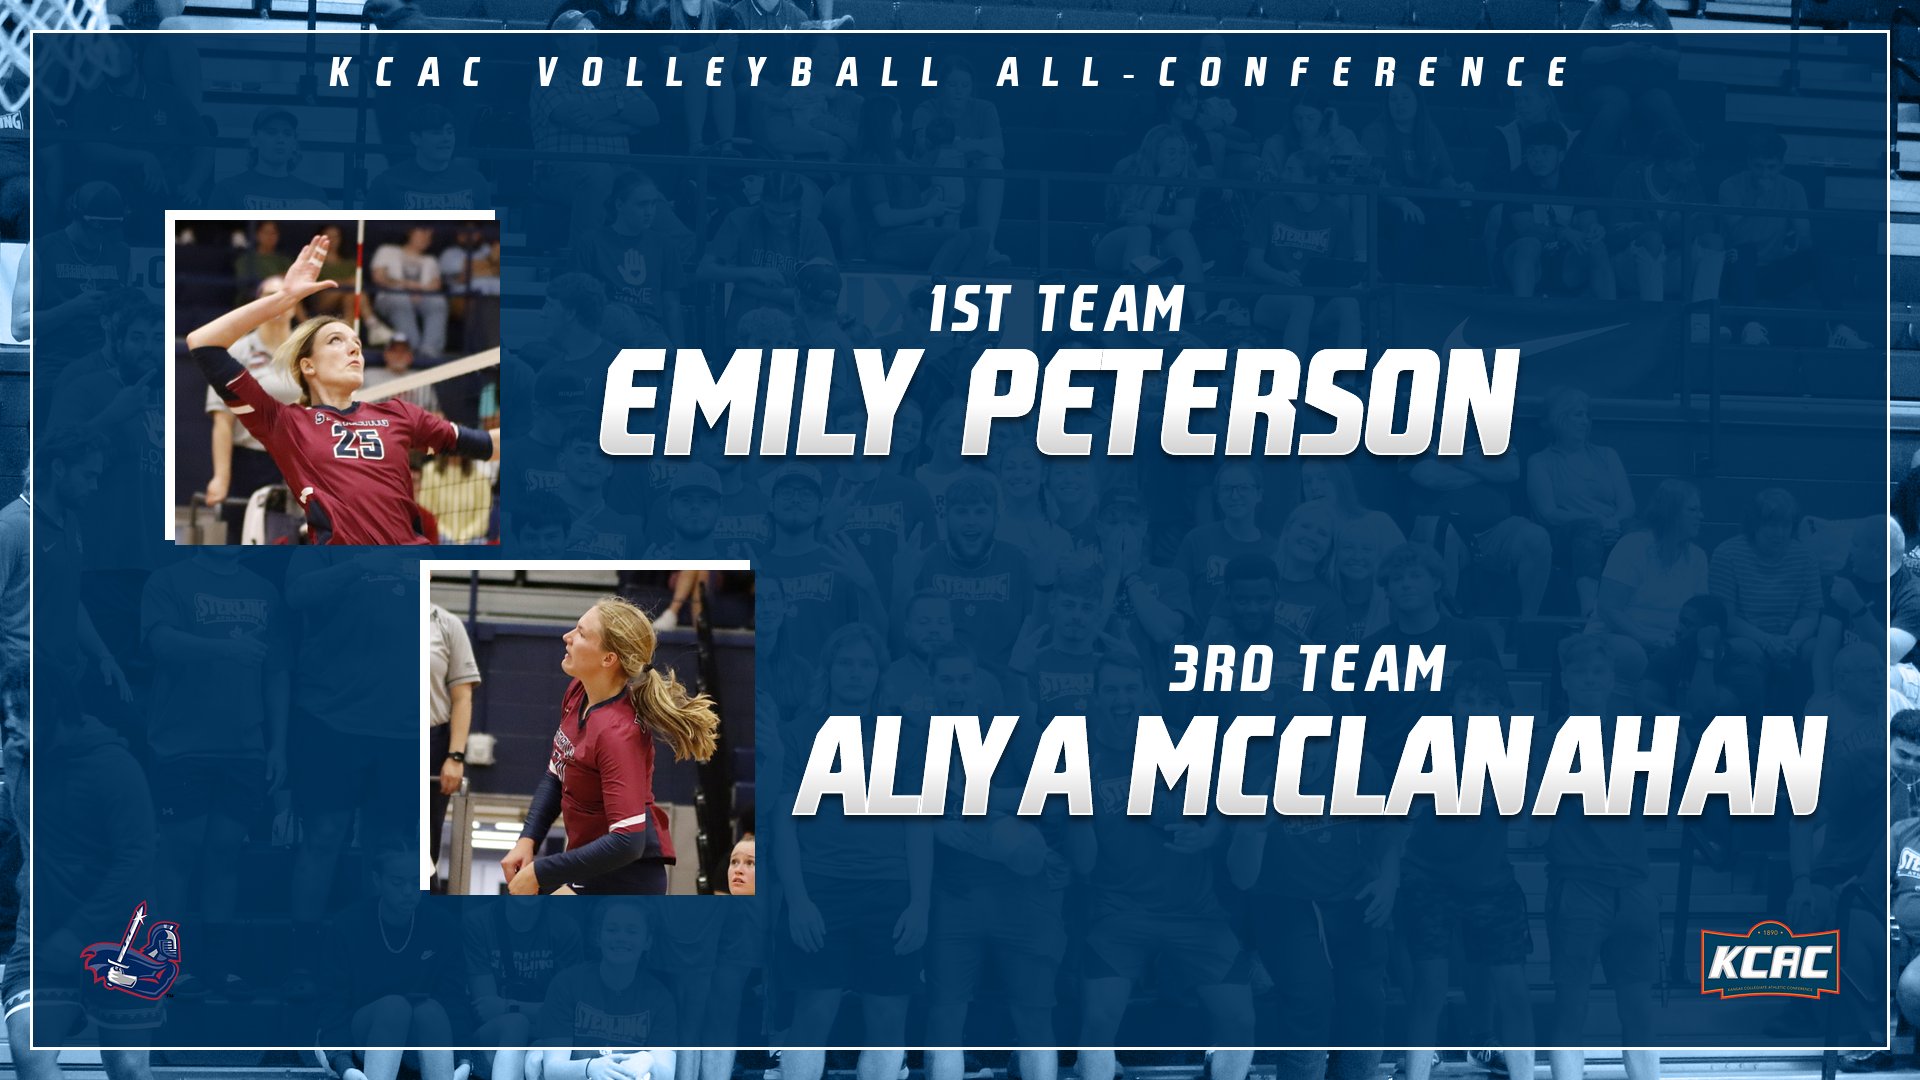 Peterson and McClanahan Selected for All-Conference Honors